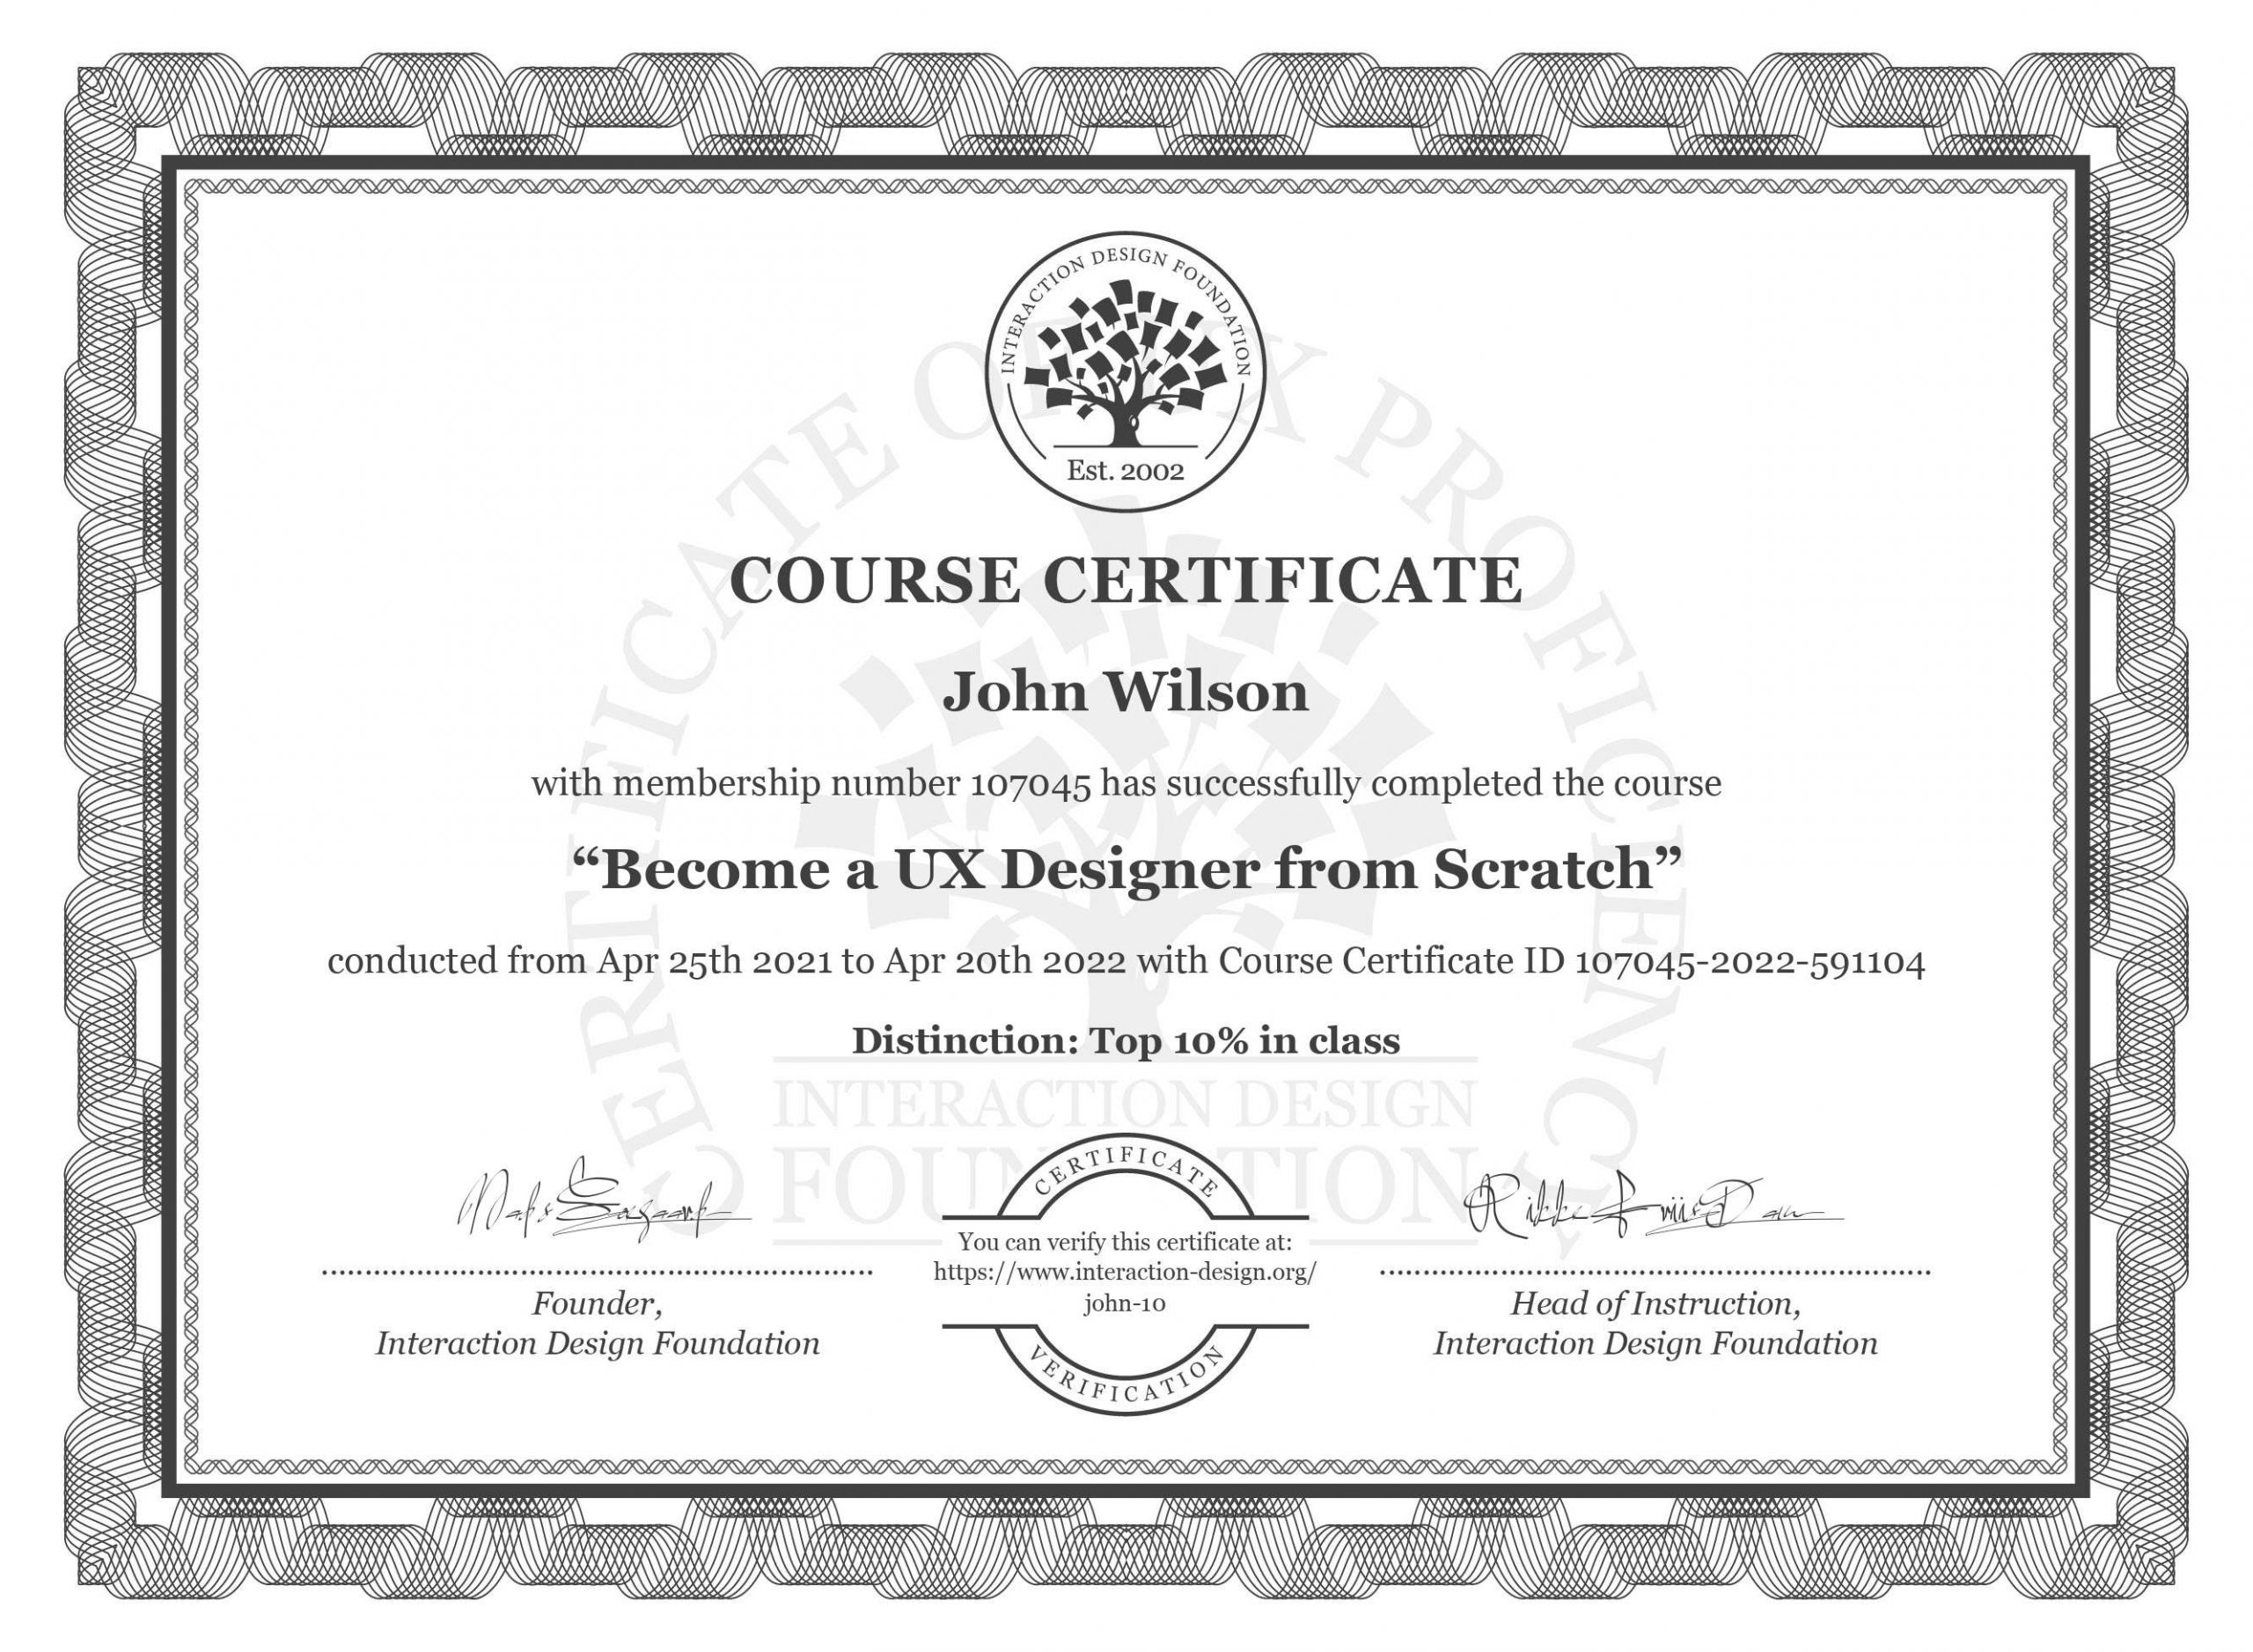 Review of the interaction Design Foundation - Course certification for John Wilson